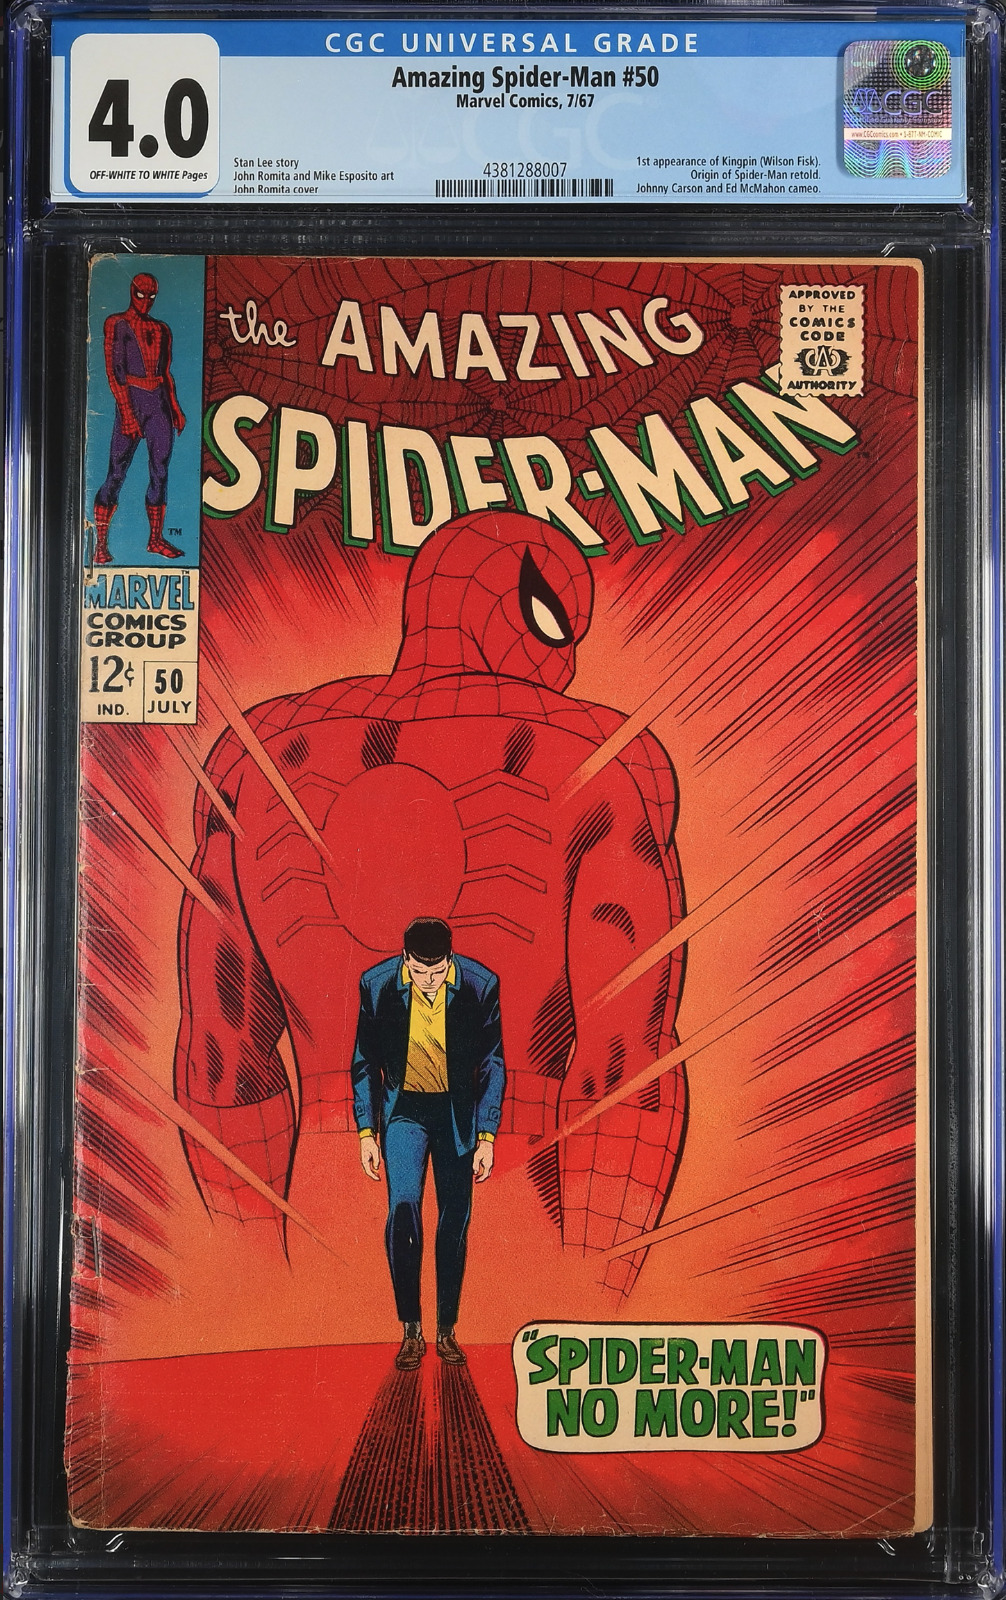 THE AMAZING SPIDER-MAN #50 JULY 1967 CGC 4.0 *MAJOR KEY* FIRST KINGPIN CLASSIC